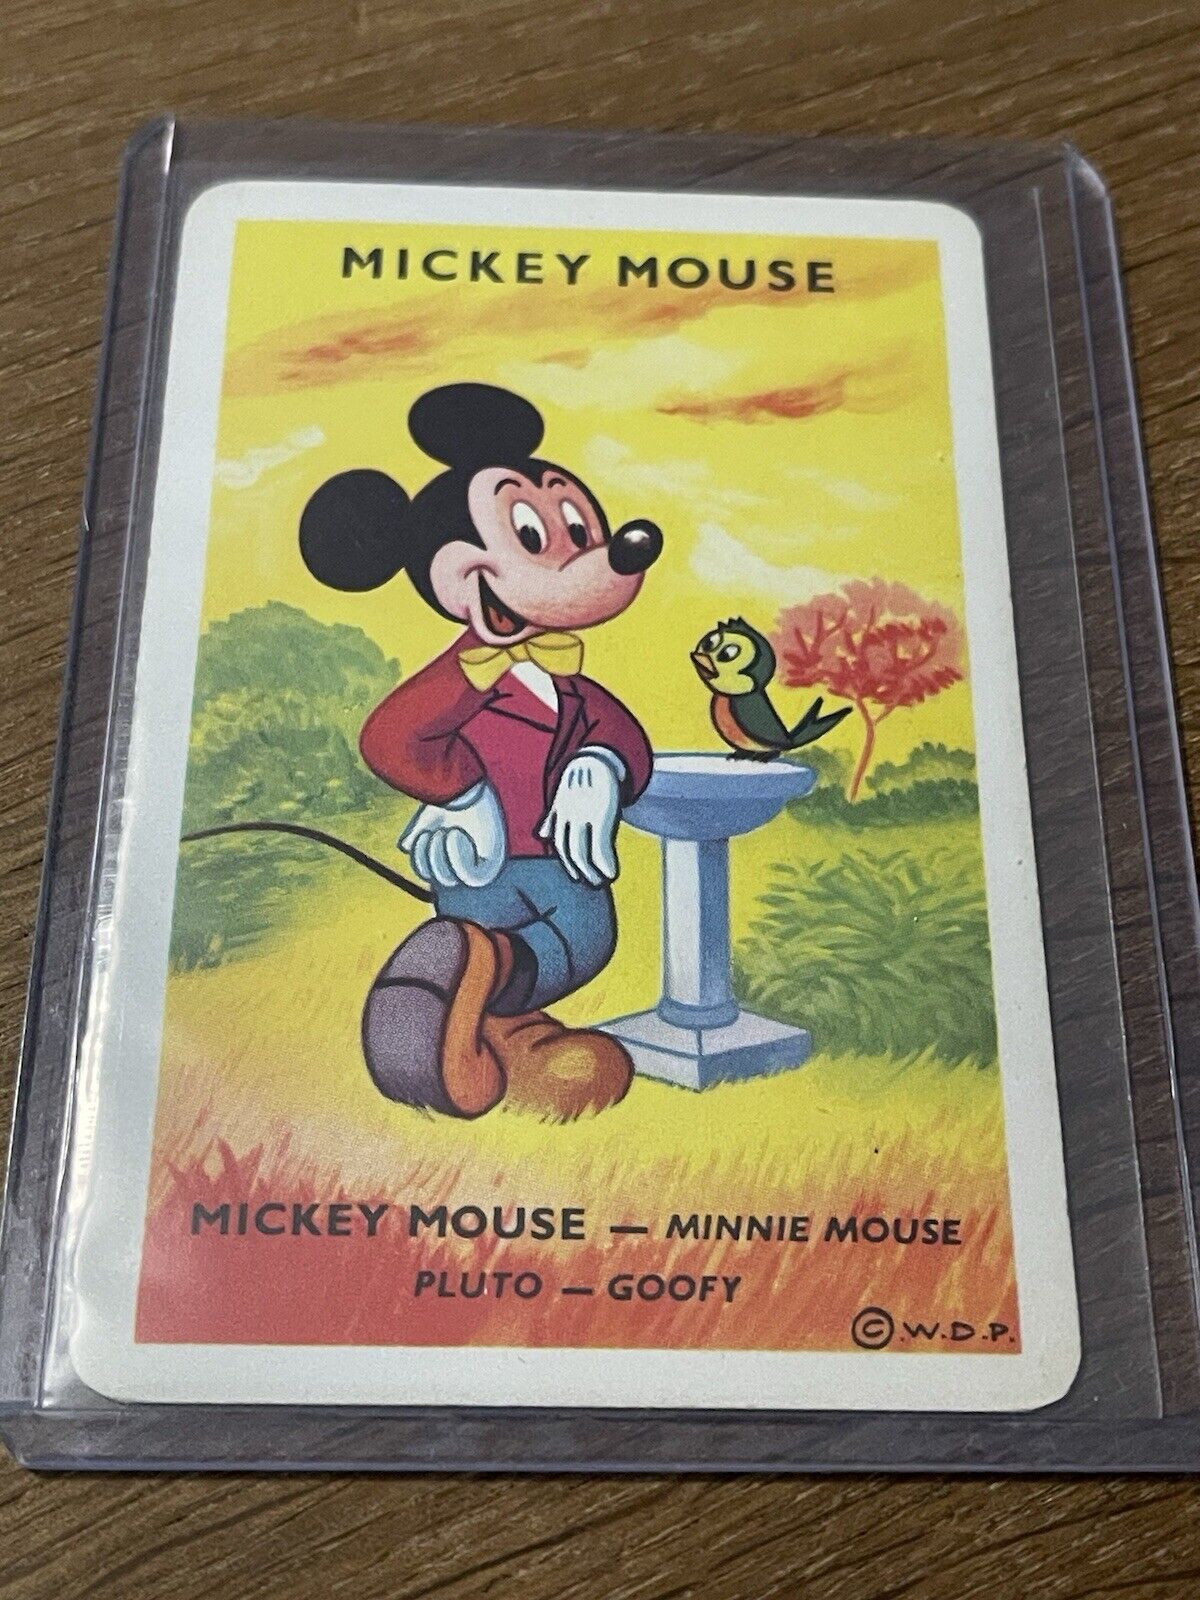 Vintage Rare French Disney 🎥 Card Game Mickey Mouse Playing Card VERY RARE